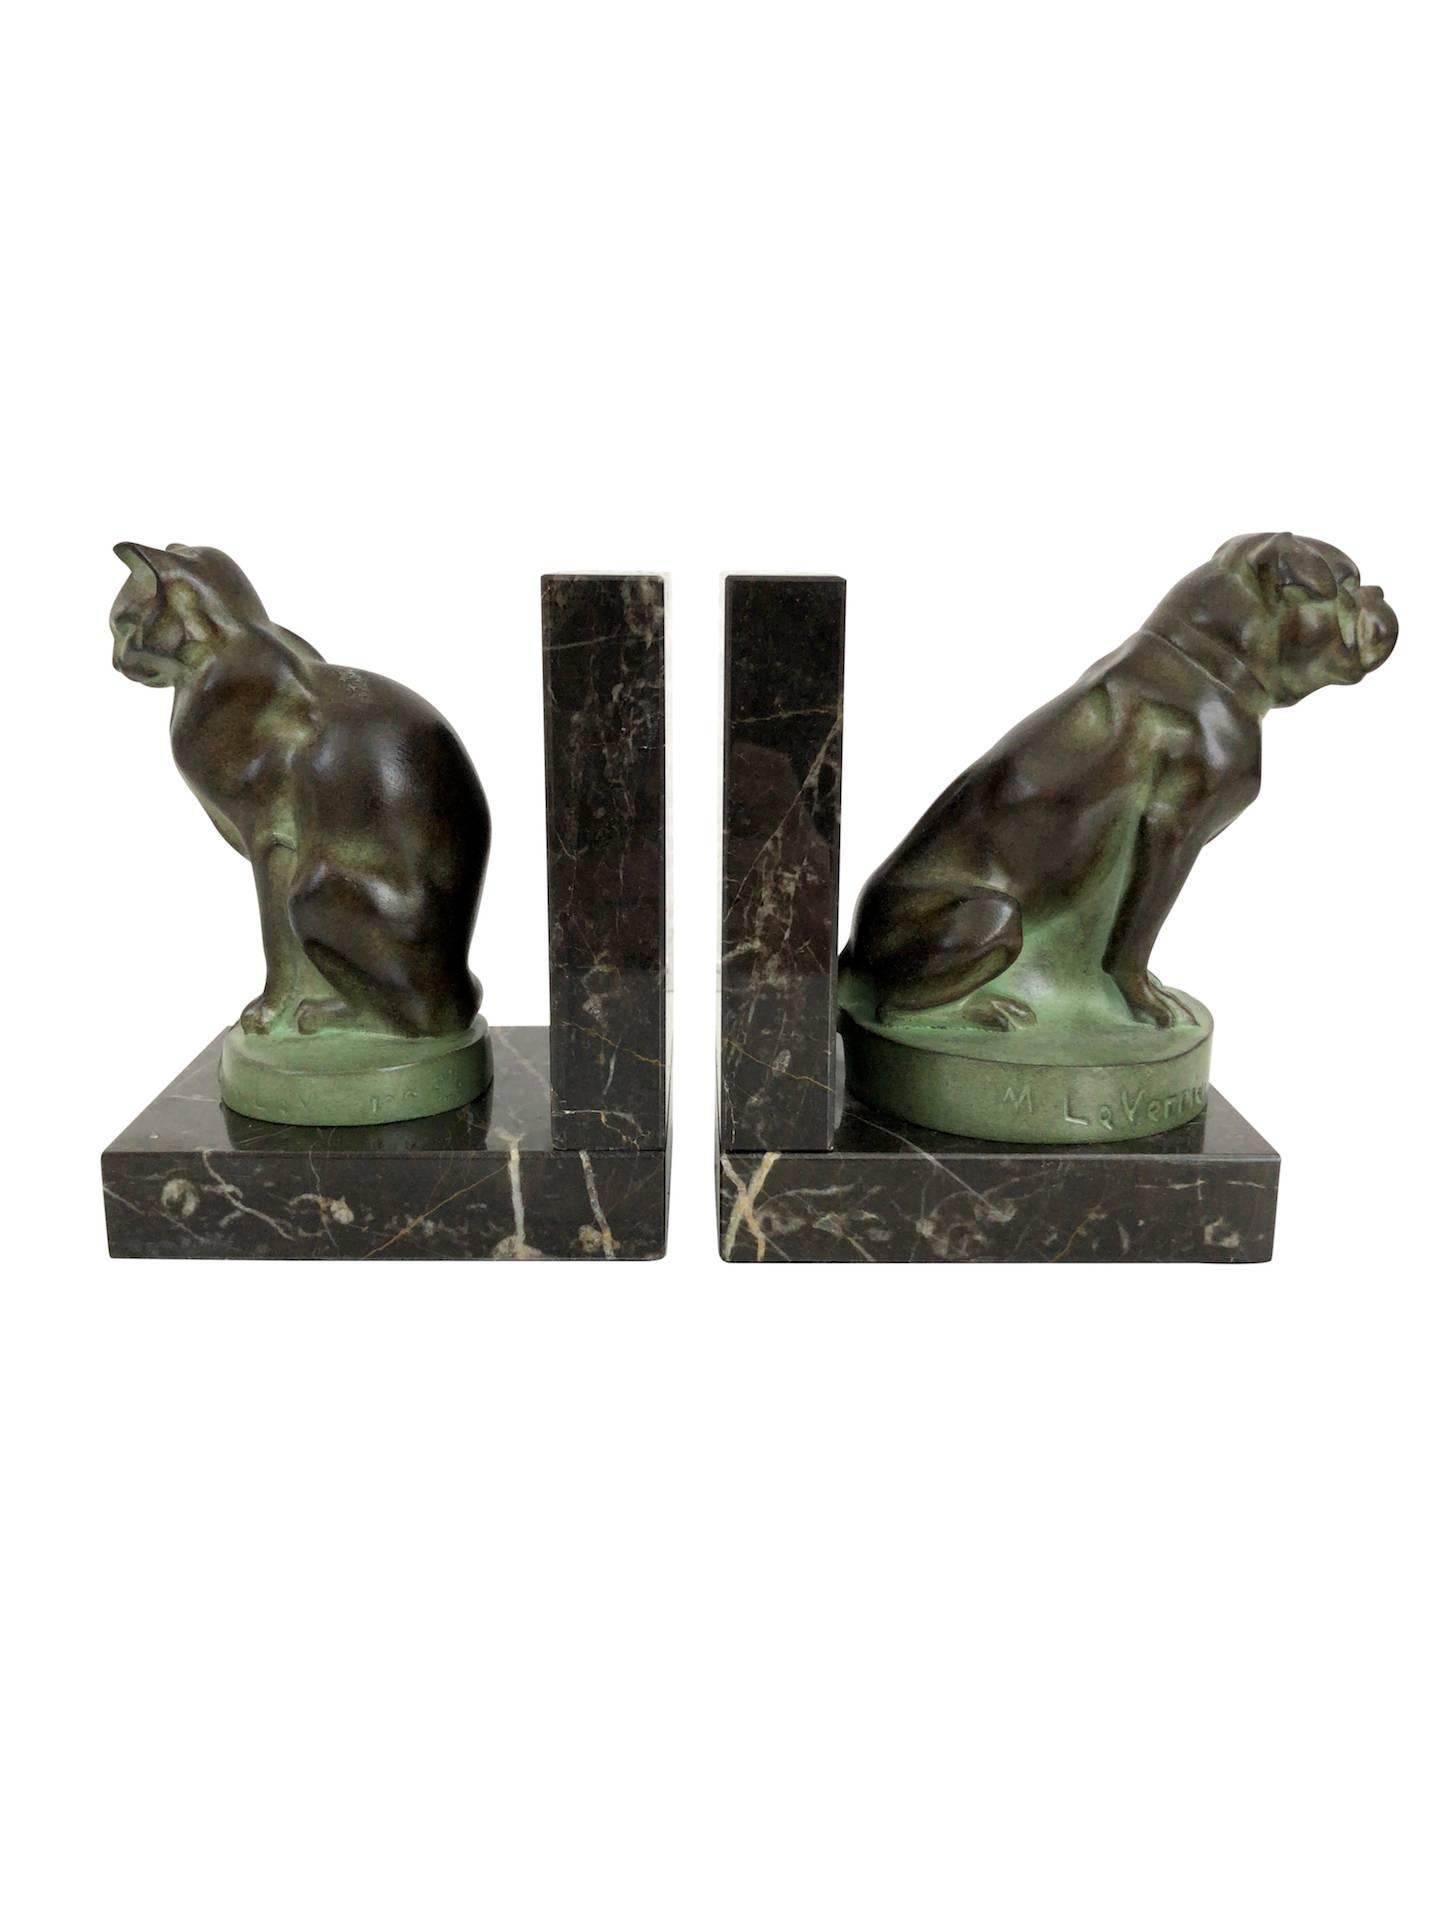 “Chat et Dogue” (cat and dog )
Original “Max Le Verrier”
Art Deco style, France

Bookends made in “Régule” (spelter)
Socle in black marble
signed
Green patina

Dimensions, each piece:
Width 10 cm
Height 13 cm
Depth 8 cm.